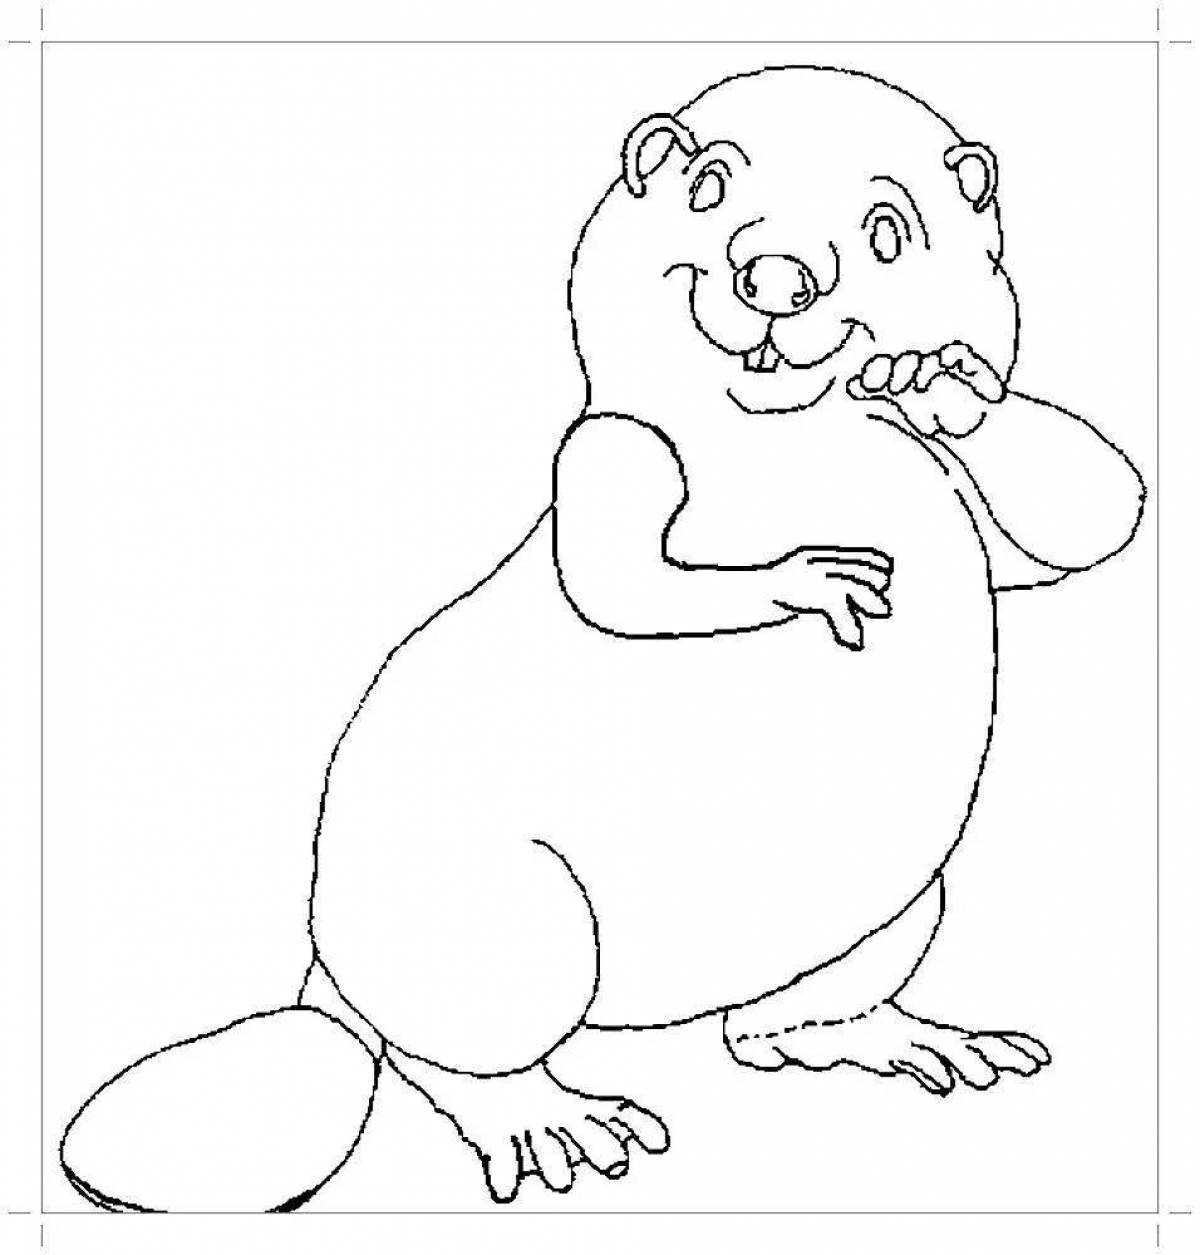 Fancy beaver coloring for kids